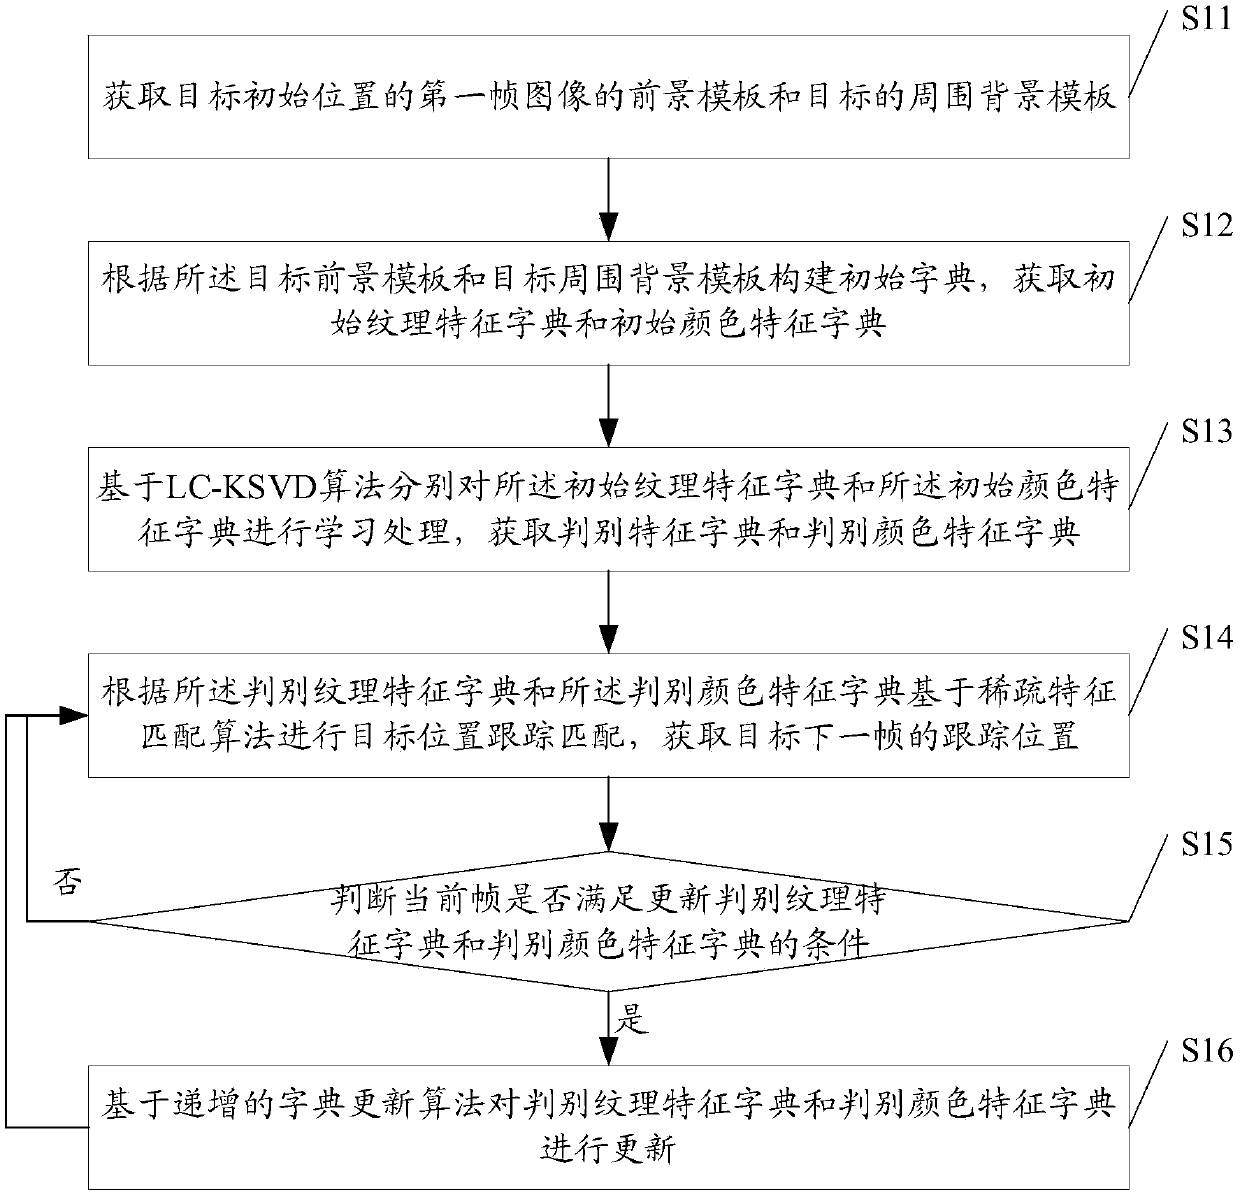 Target tracking method and system based on multi-feature and self-adaptive dictionary learning